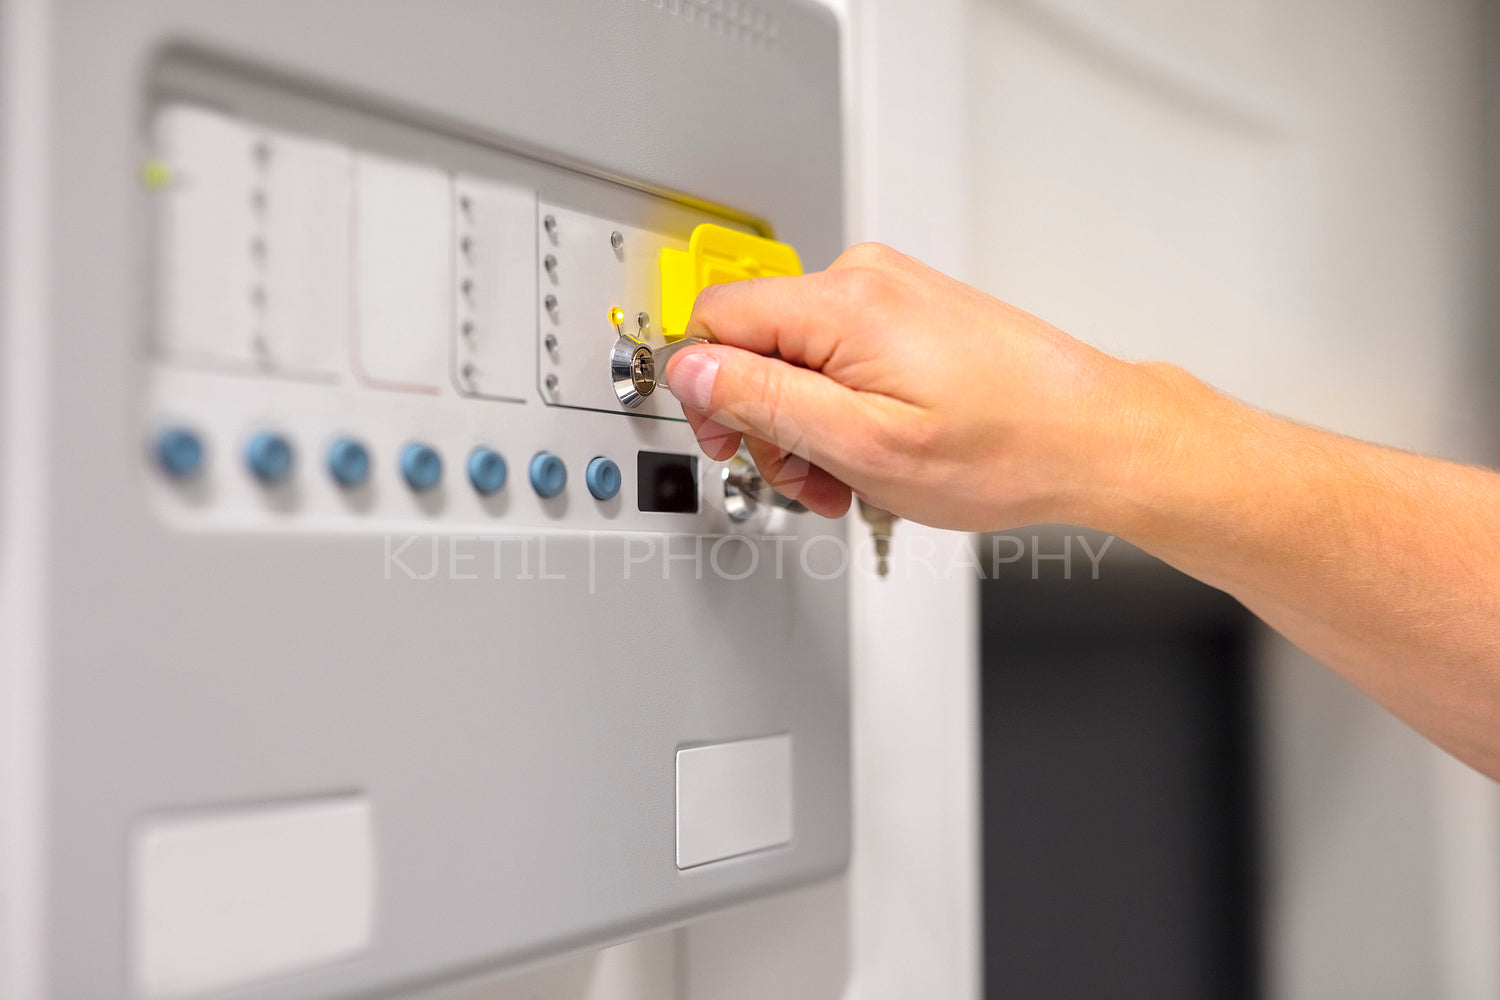 IT Engineer Using Key To Open Fire Panel In Datacenter